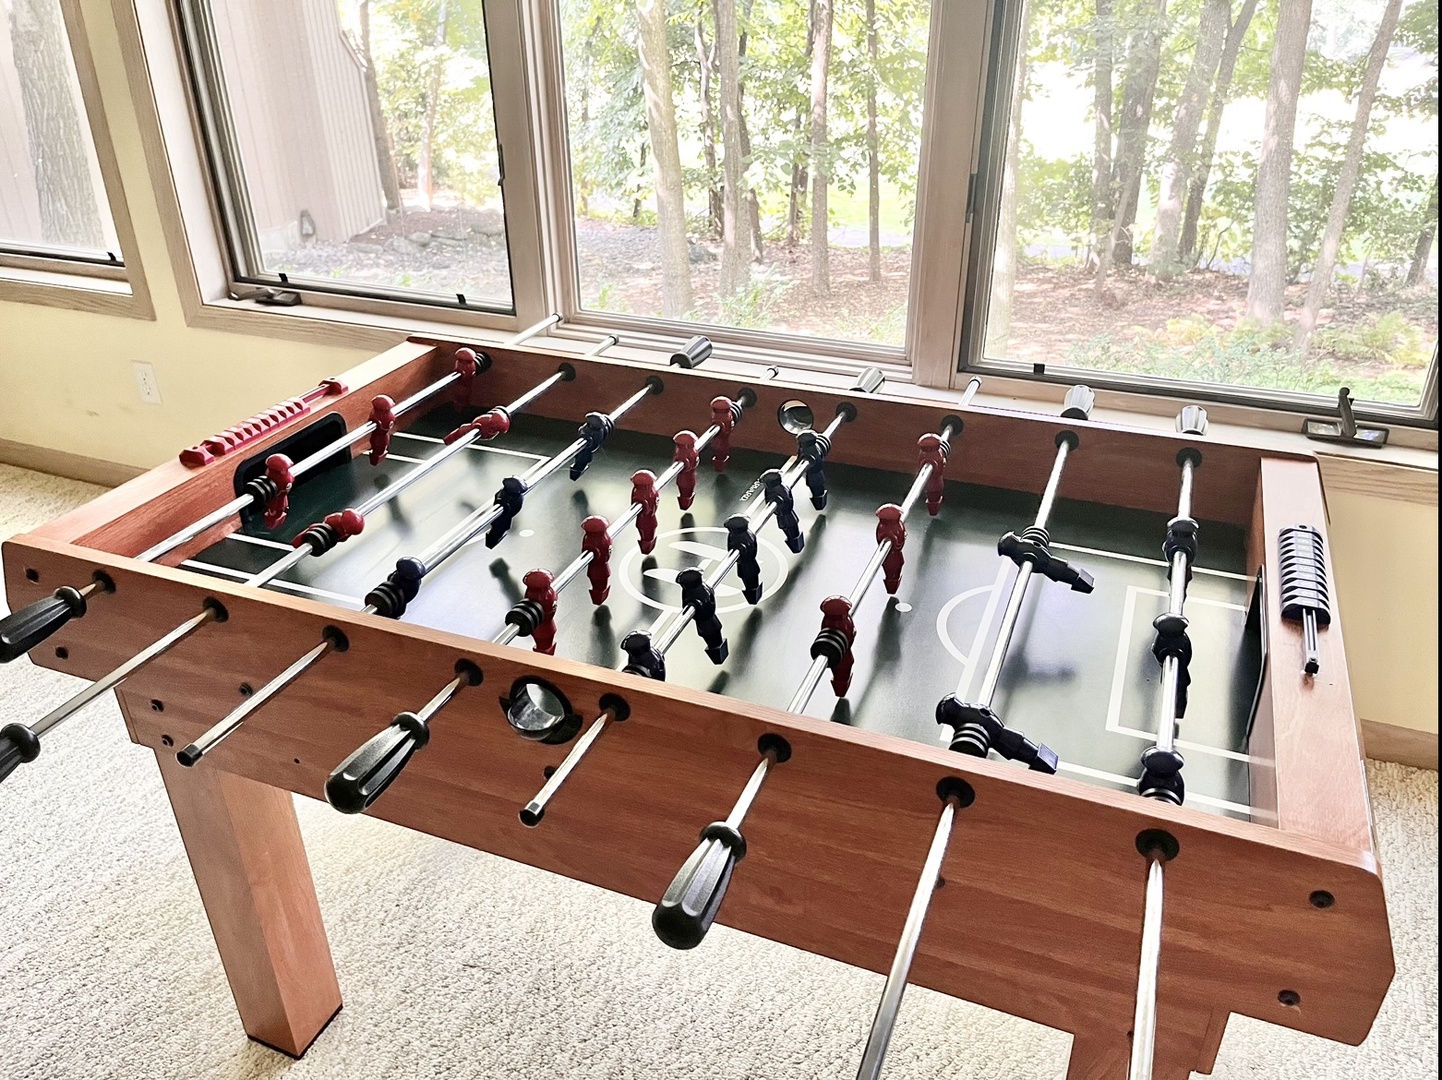 Unleash your competitive side on the walk-out lower level with a game of foosball